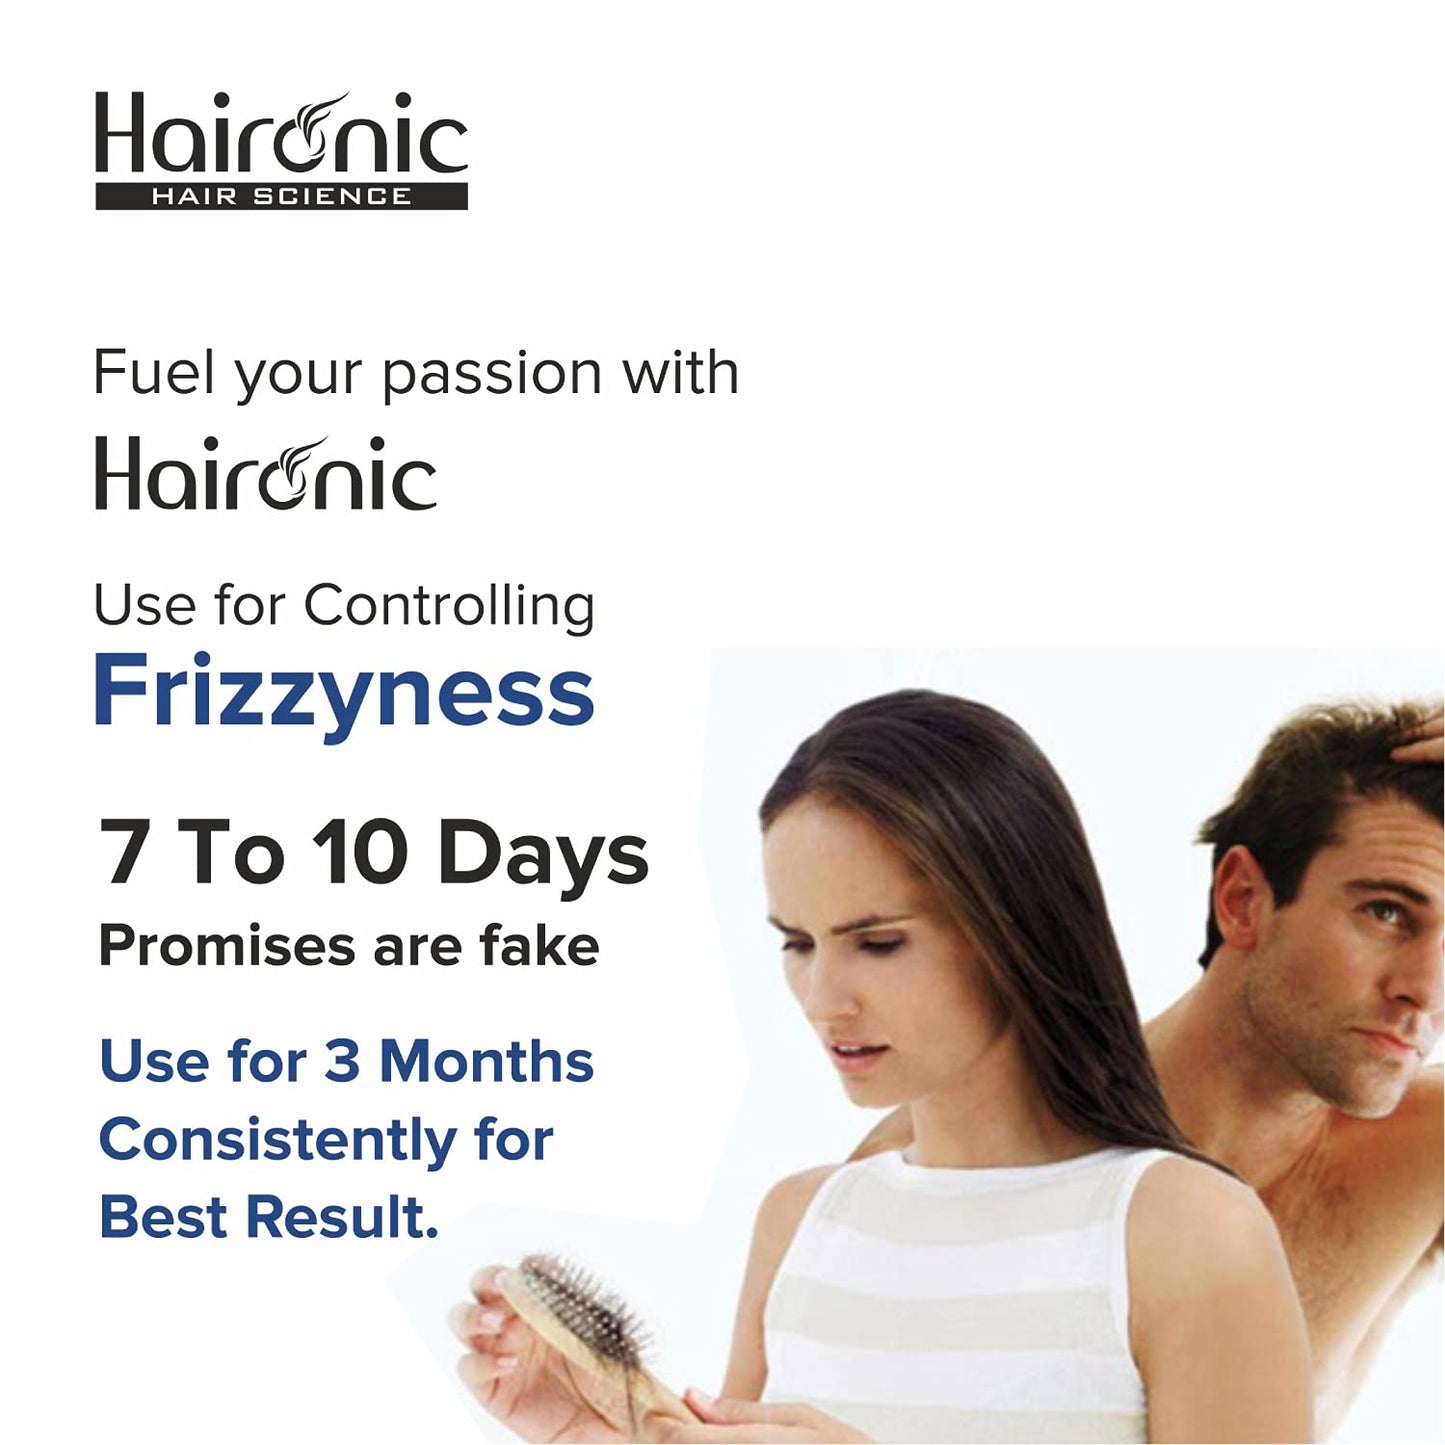 Haironic Hyaluronic Acid Hydrating Hair Thinning Post Wash Treatment Hair Serum  All Hair Types Controls Frizz Brittleness Hair Loss - 100ml Pack of 2